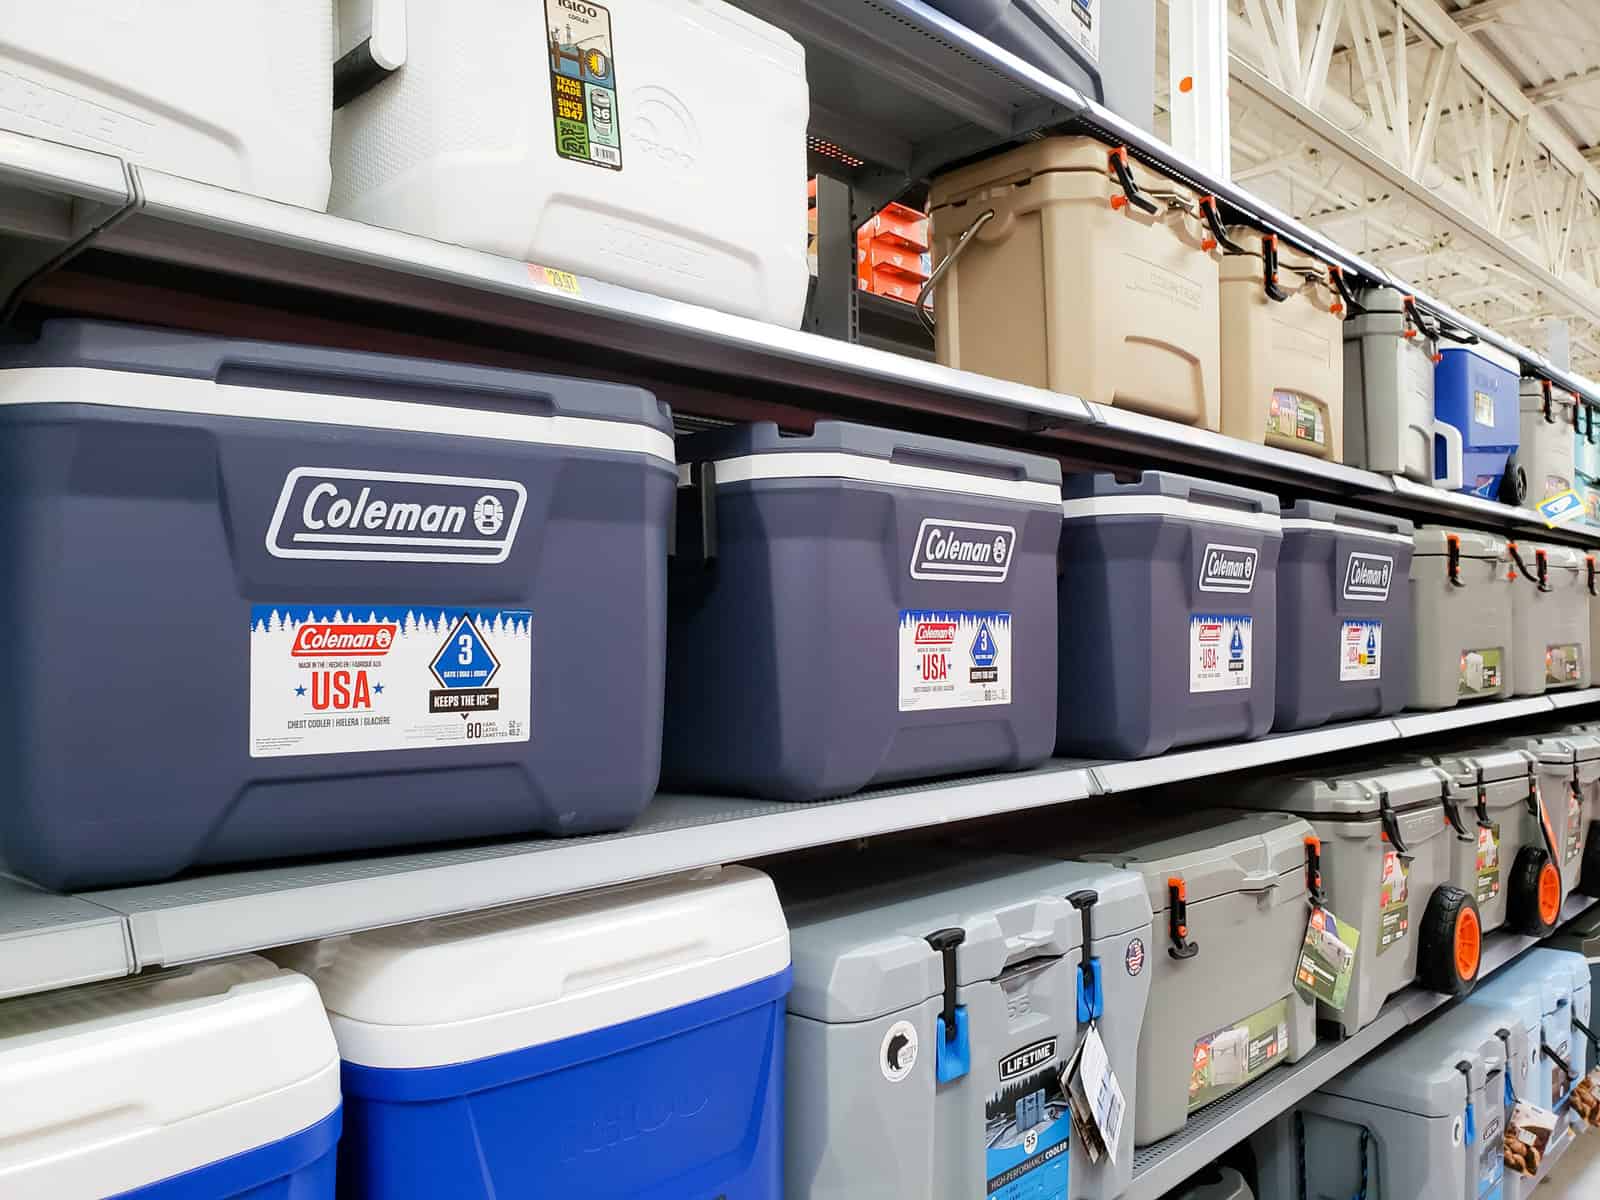 best coolers for camping and RVing